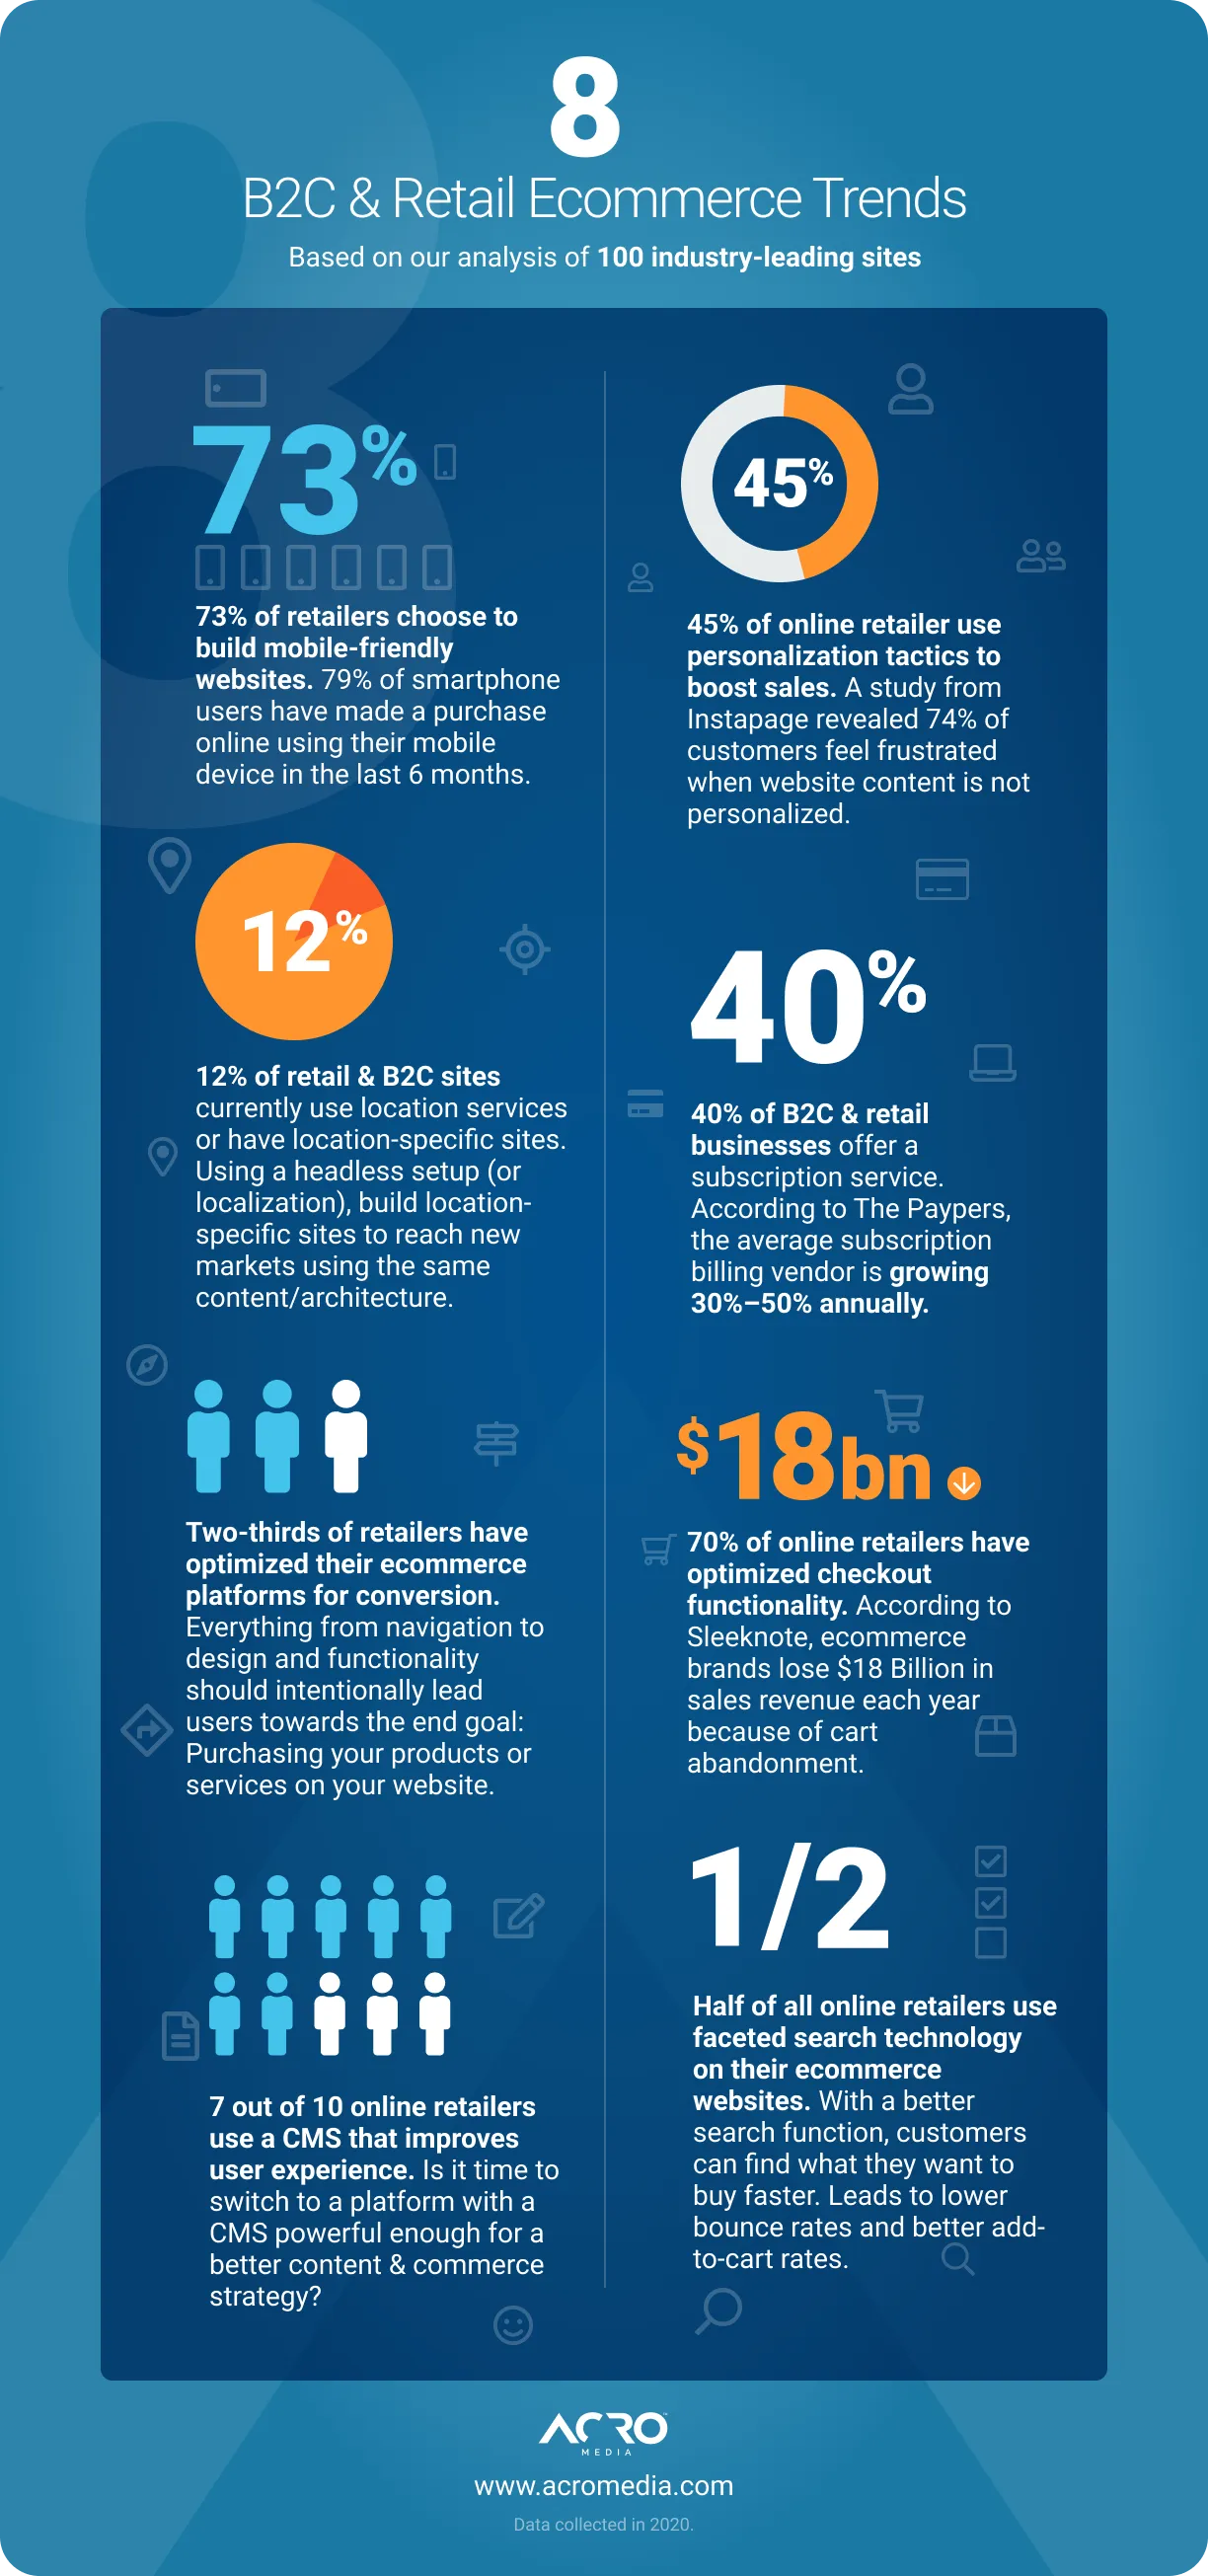 Eight ecommerce trends for retail & B2C - Infographic